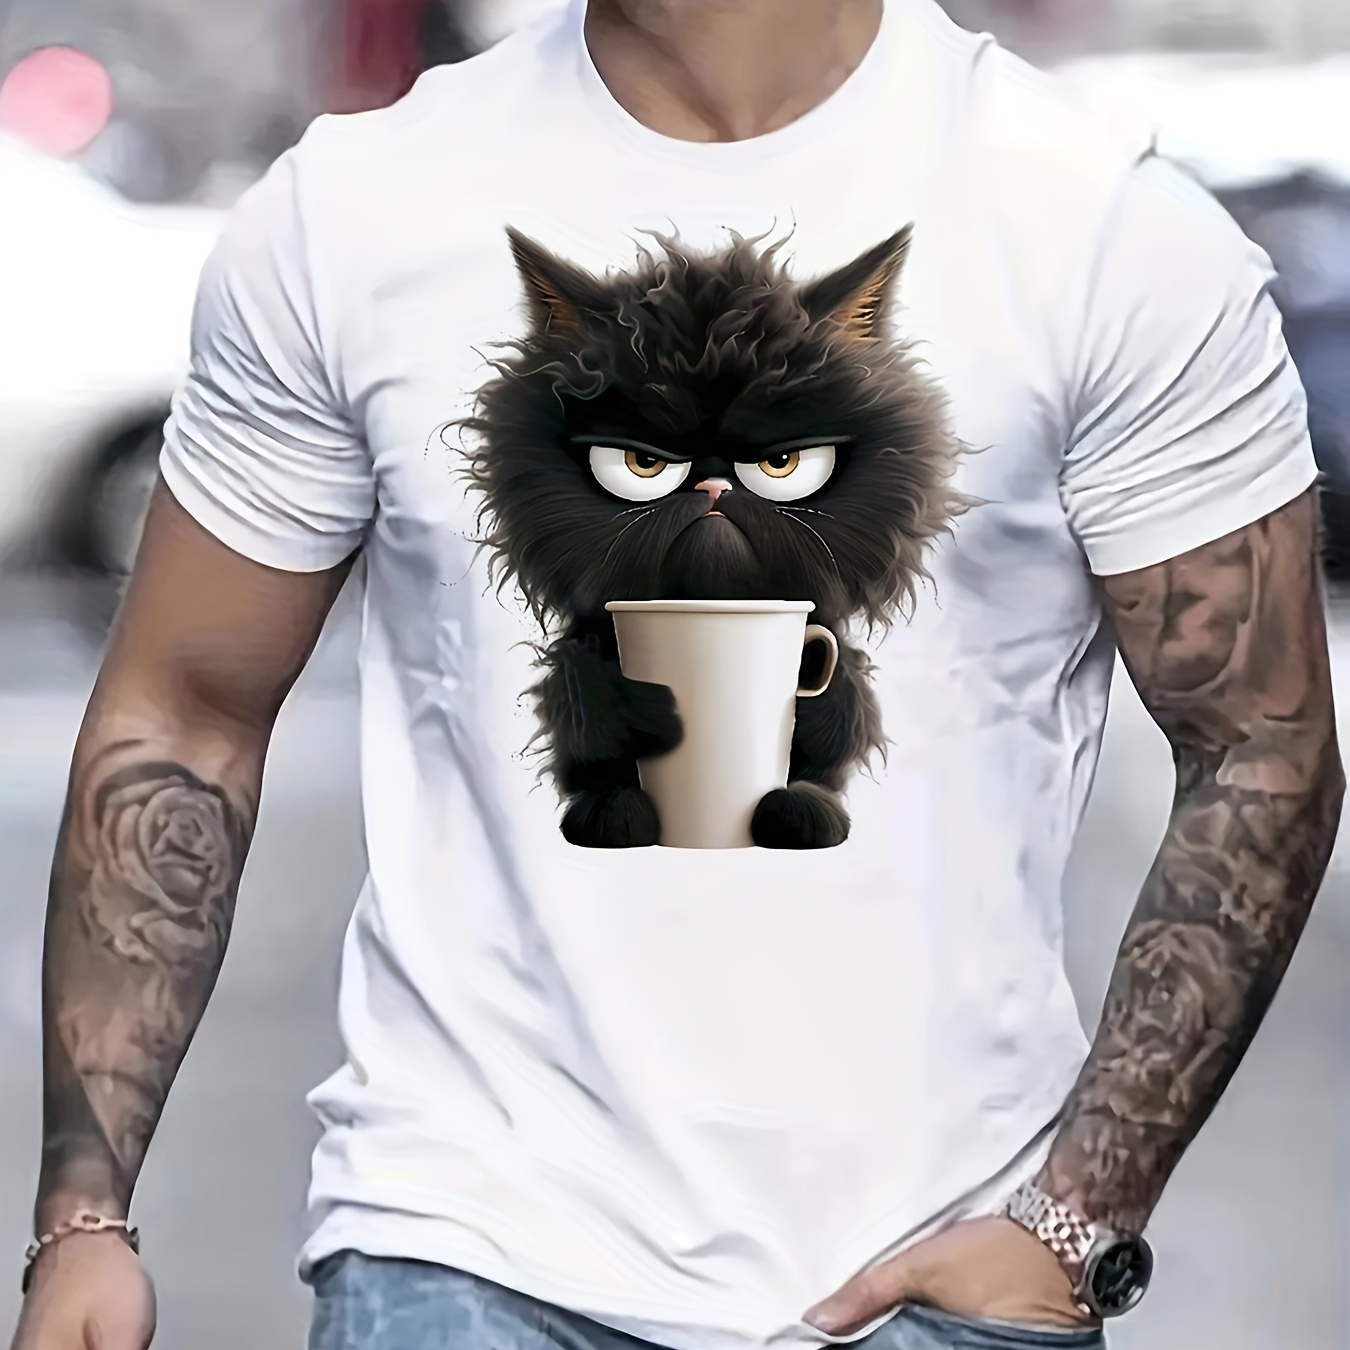 

Men's Cartoon Style Angry Cat With A Cup Pattern Print Crew Neck And Short Sleeve T-shirt, Casual And Stylish Tee For Men, Funny Tops Suitable For Summer Leisurewear